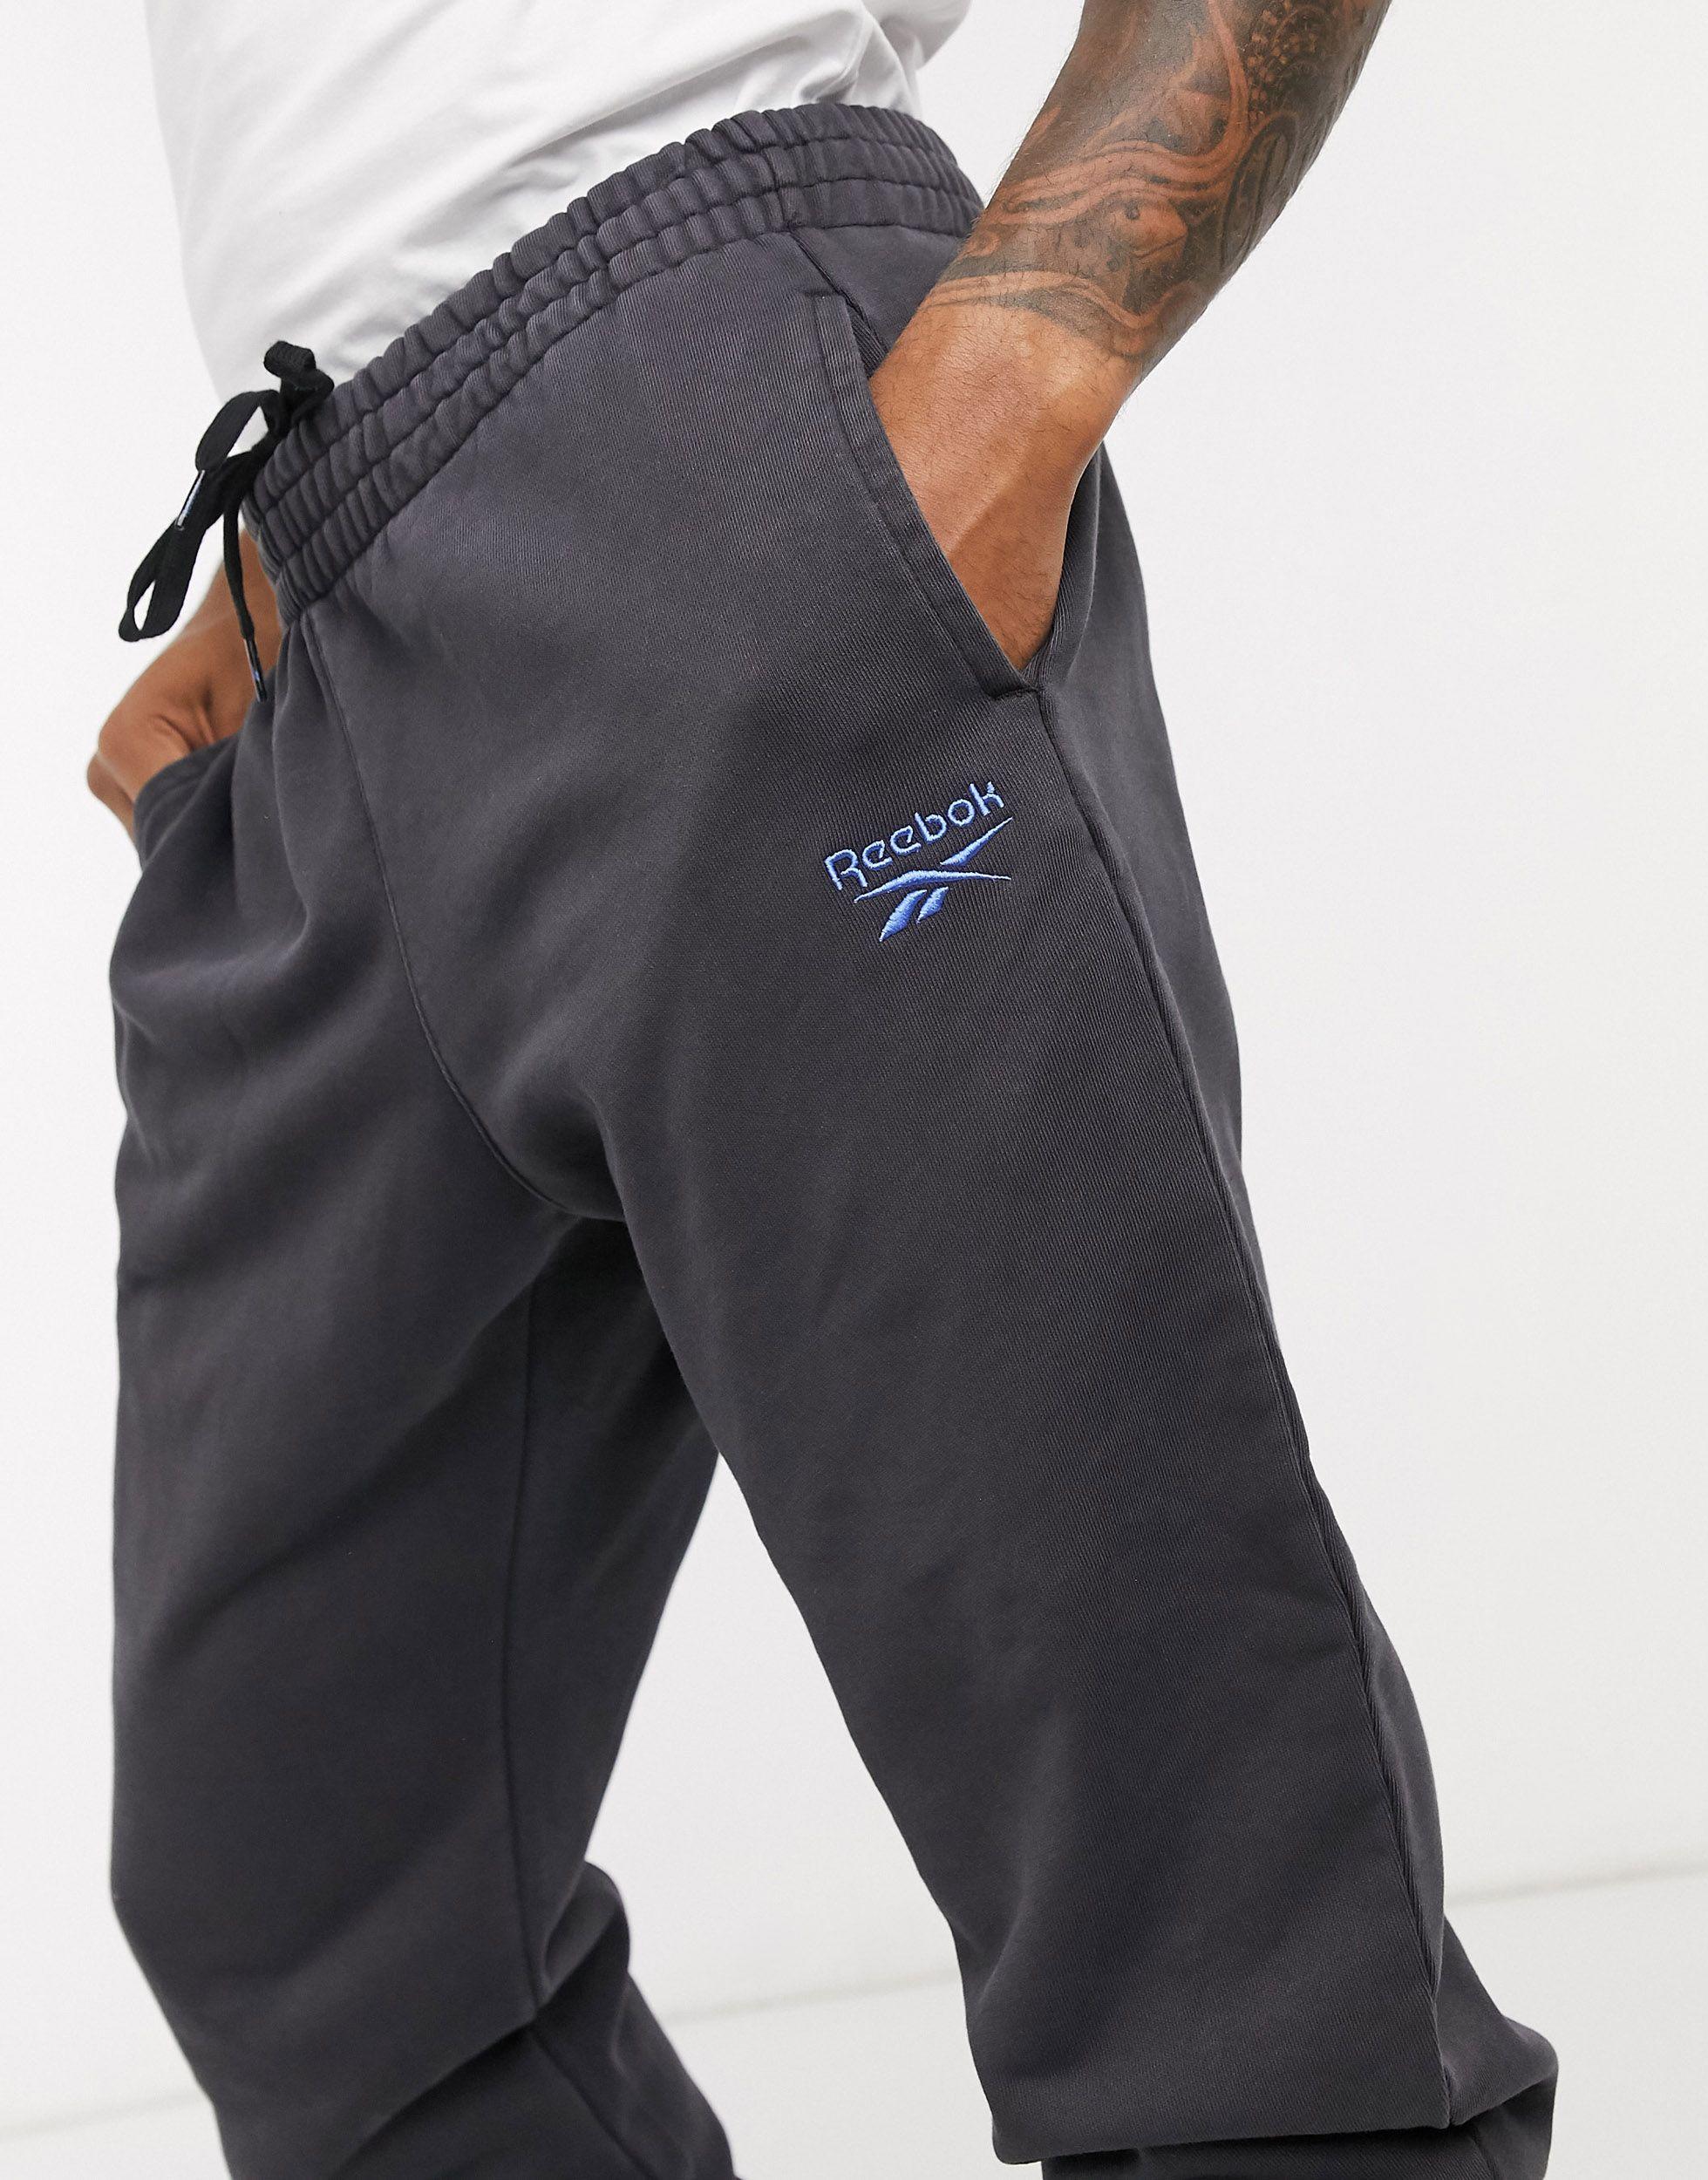 Reebok Premium Washed joggers in Black for Men - Lyst